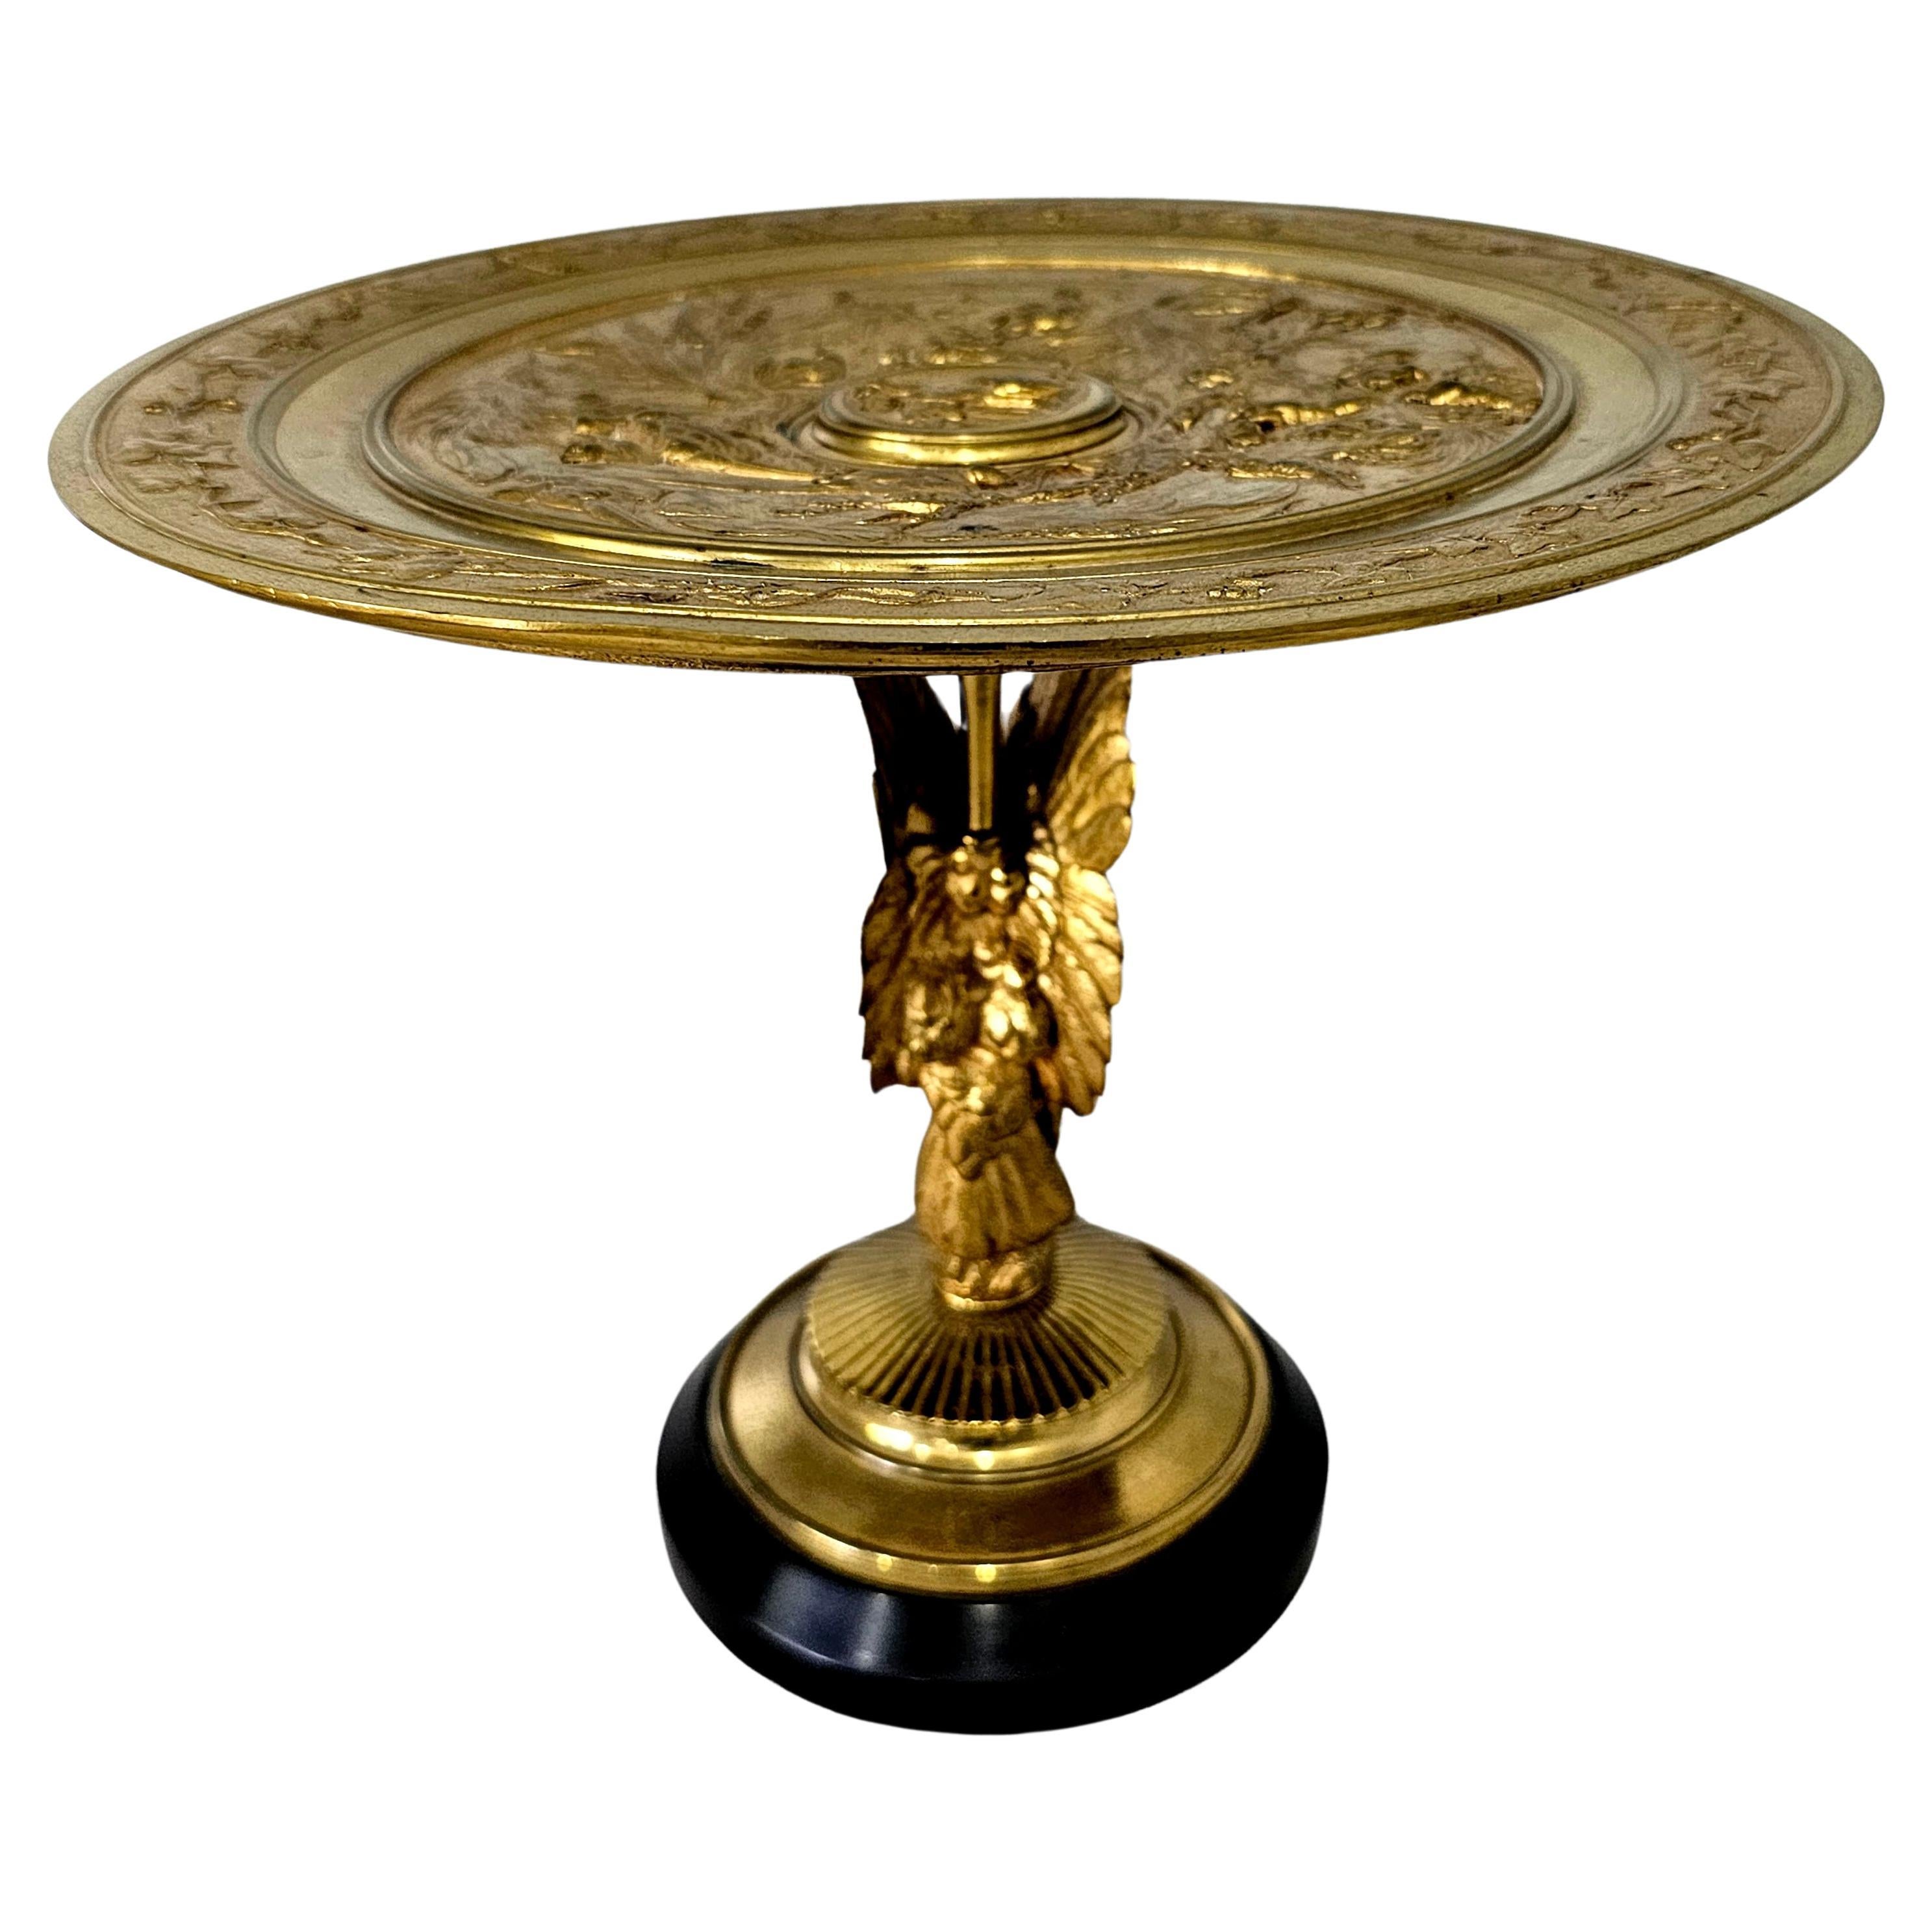 19th Century 19th C. Renaissance Gilt Bronze Sculptural Tazza Signed E. Cana 1845-1895 French For Sale